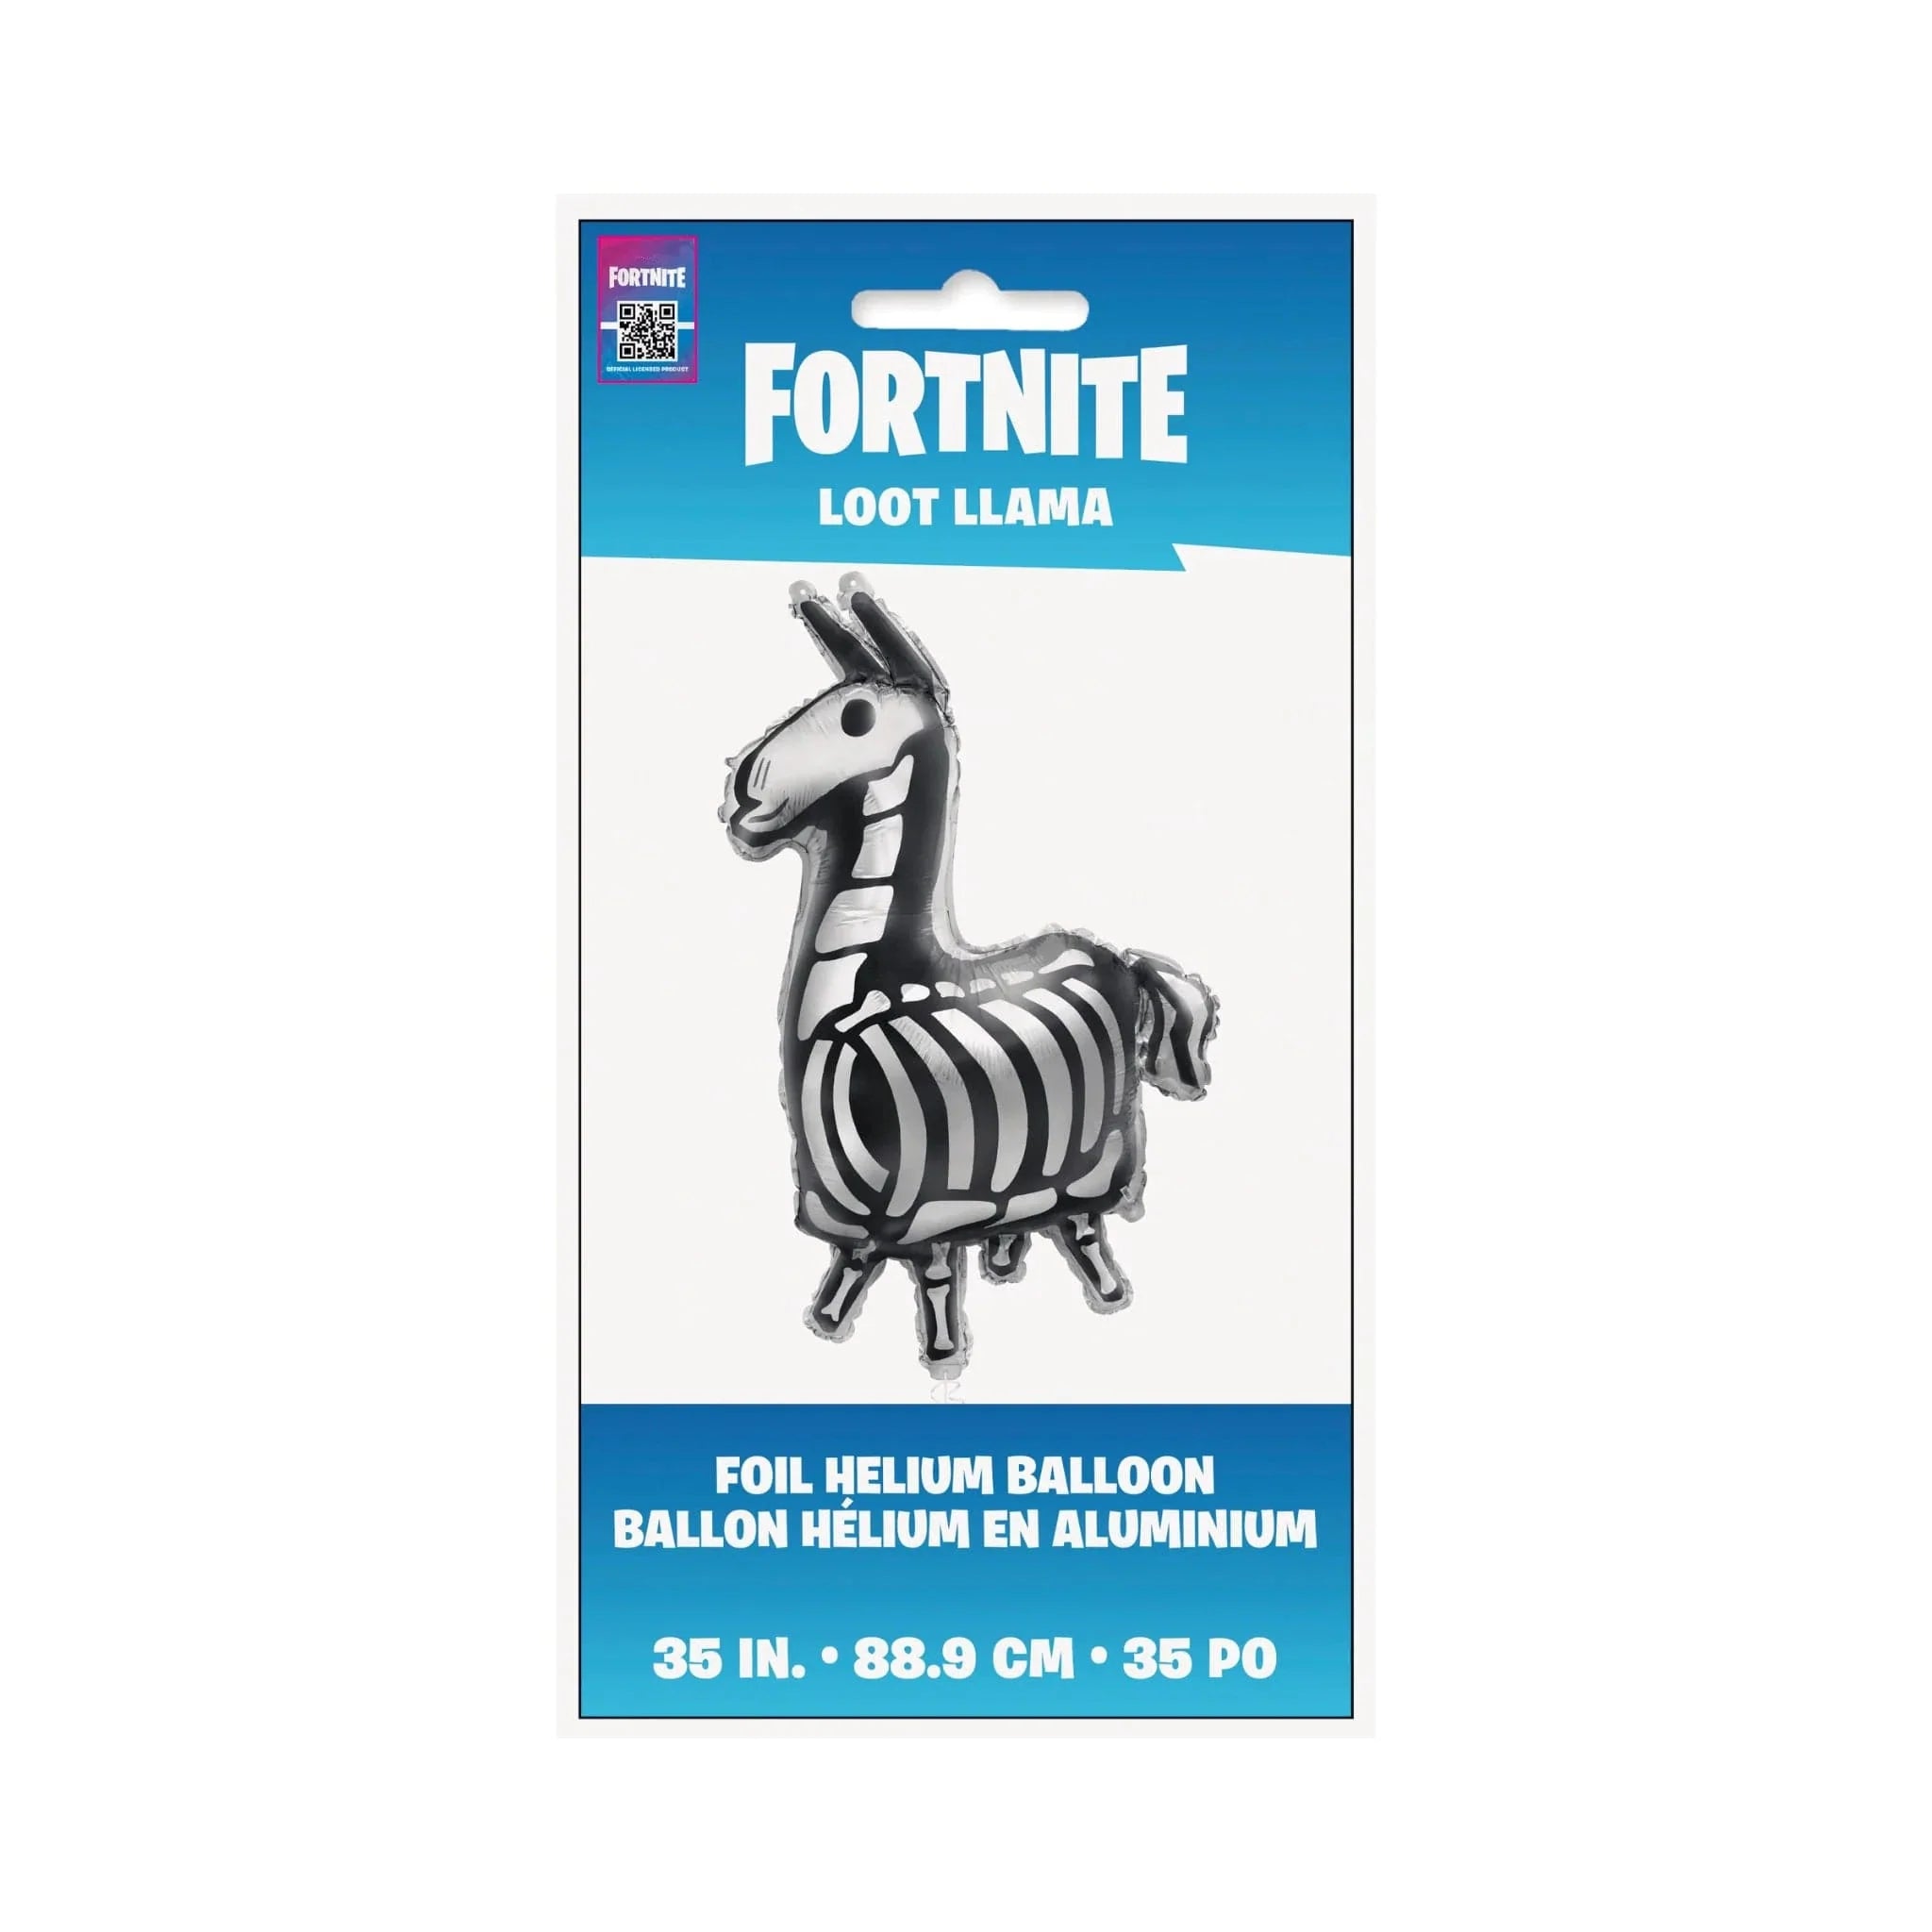 Fortnite Loot Llama Giant 35" Foil Balloon - Kids Party Craft